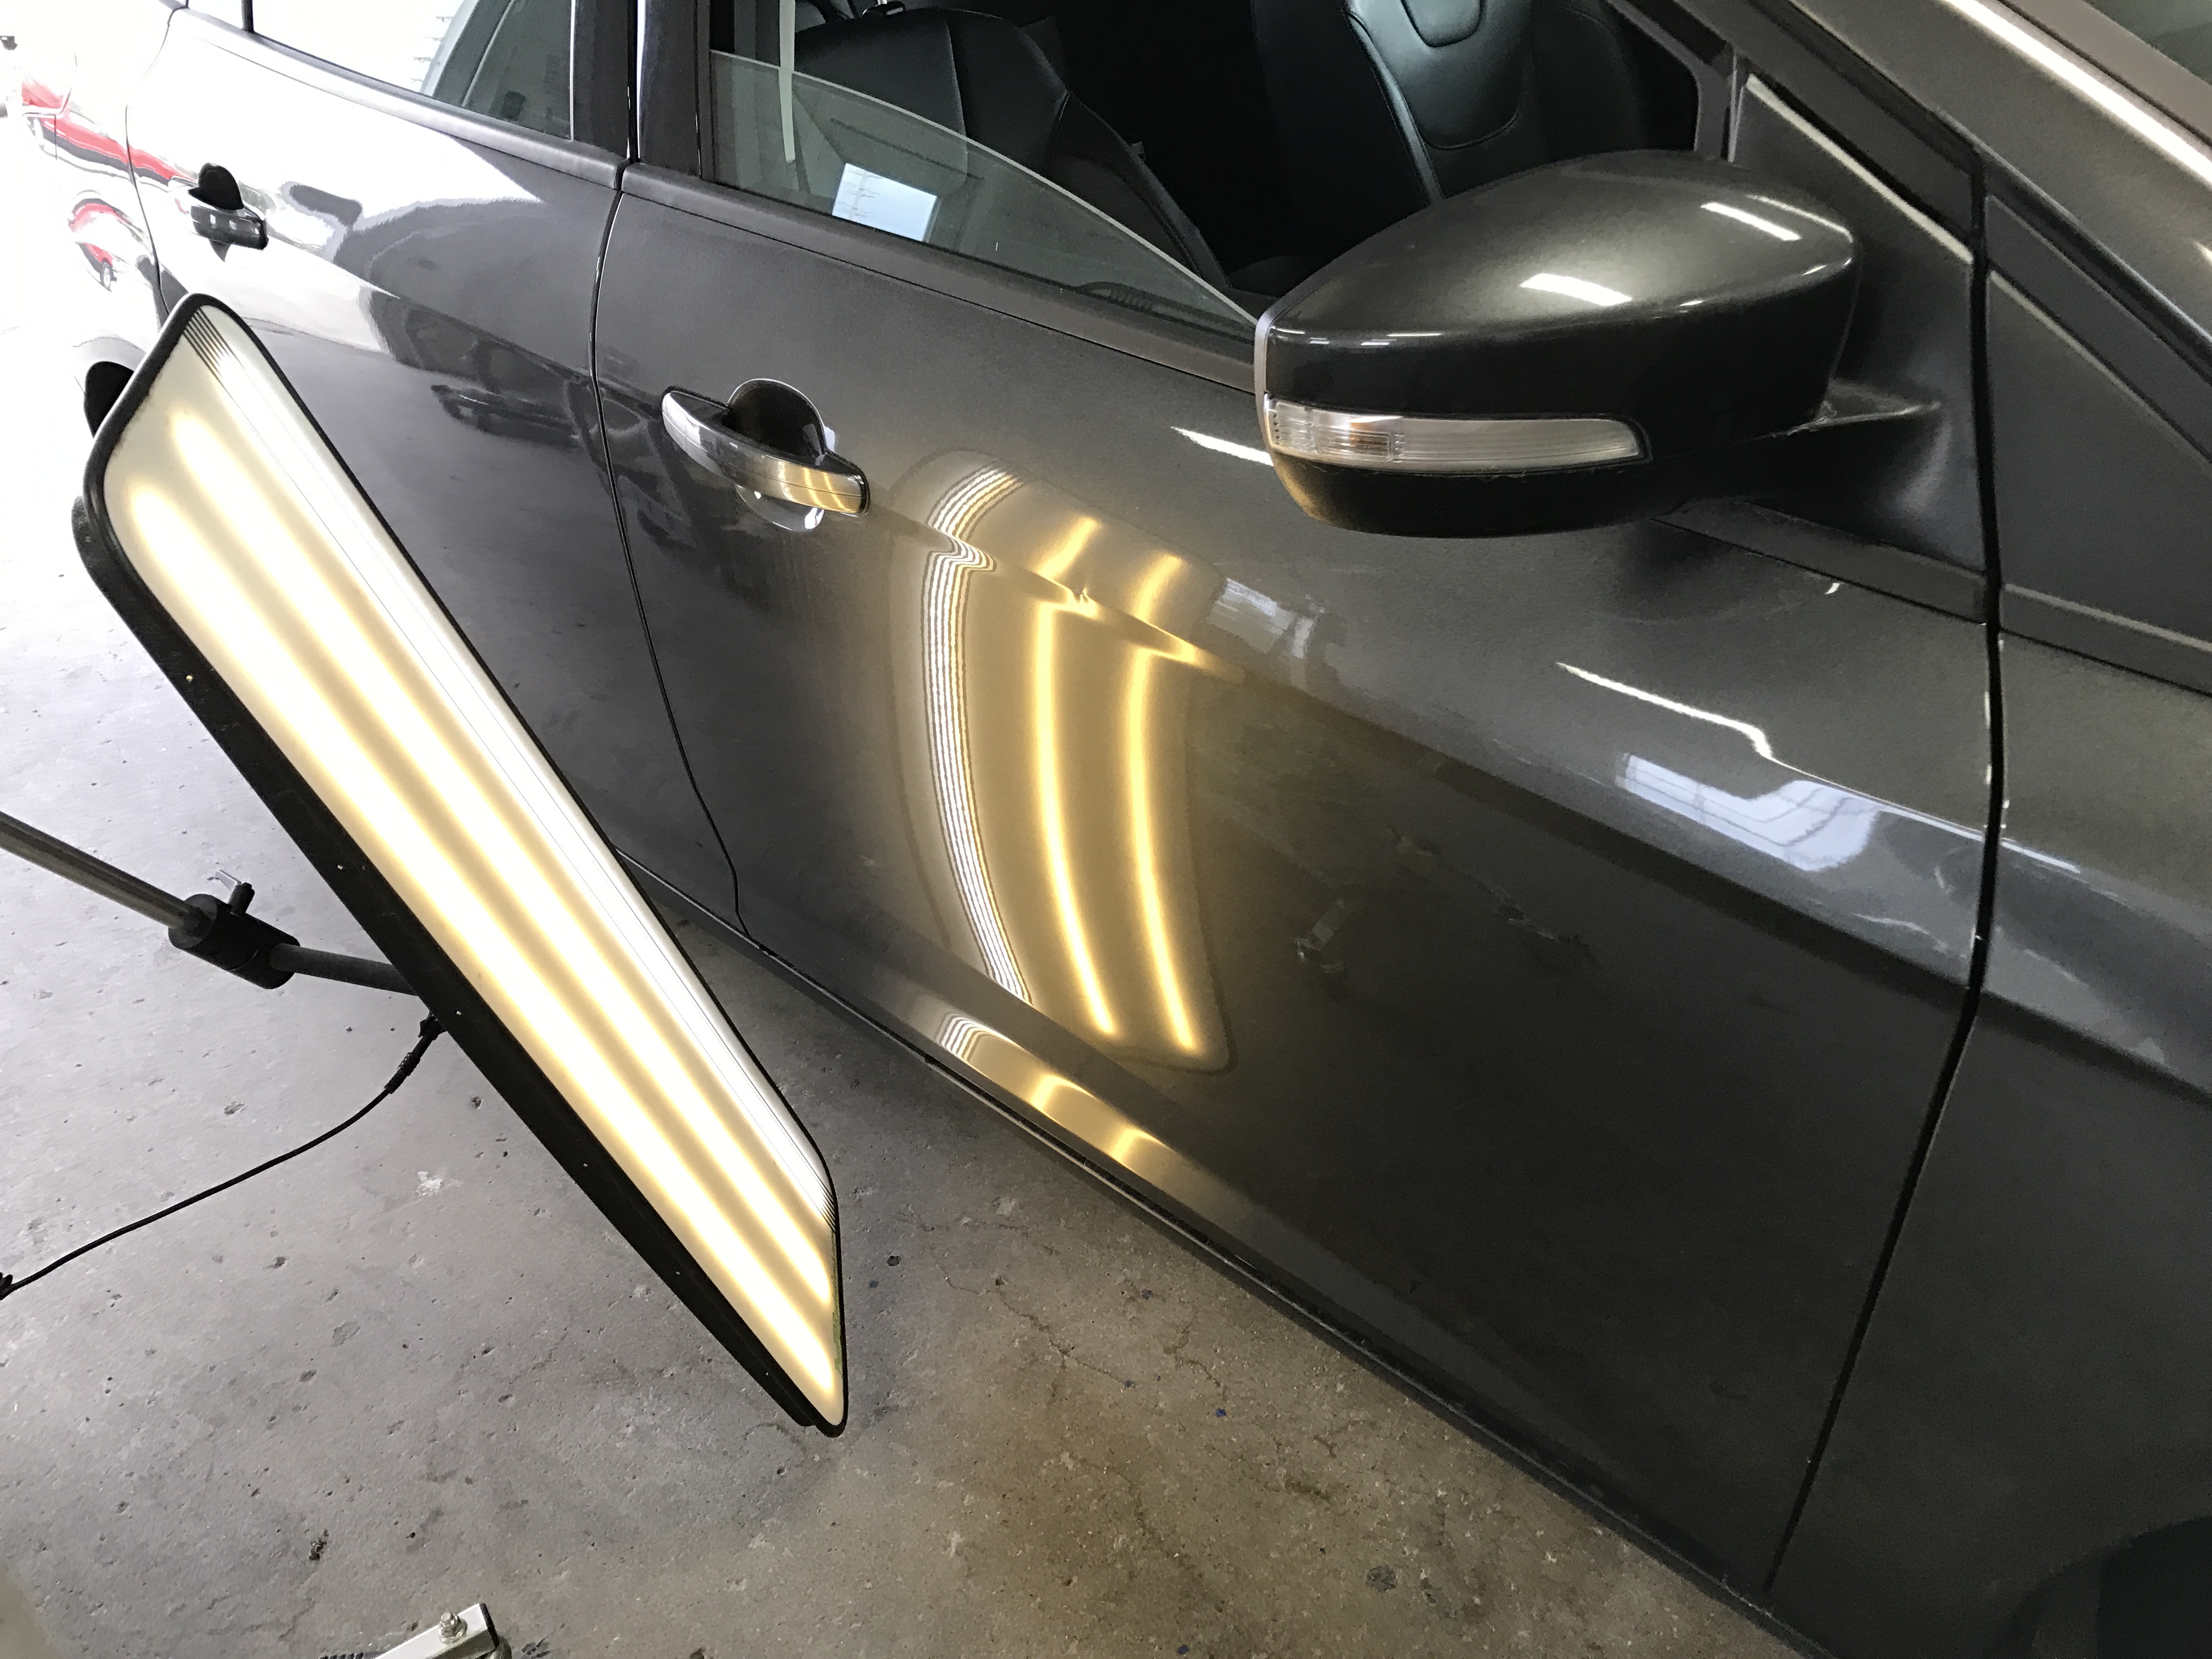 2015 Ford Focus, Paintless Dent, Dent Tech, Dent Removal, This is the before image of the vehicle's damage, if you look closely you can see the dent in the body line of the passenger door, Mobile Dent Removal Springfield, Decatur, Illinois